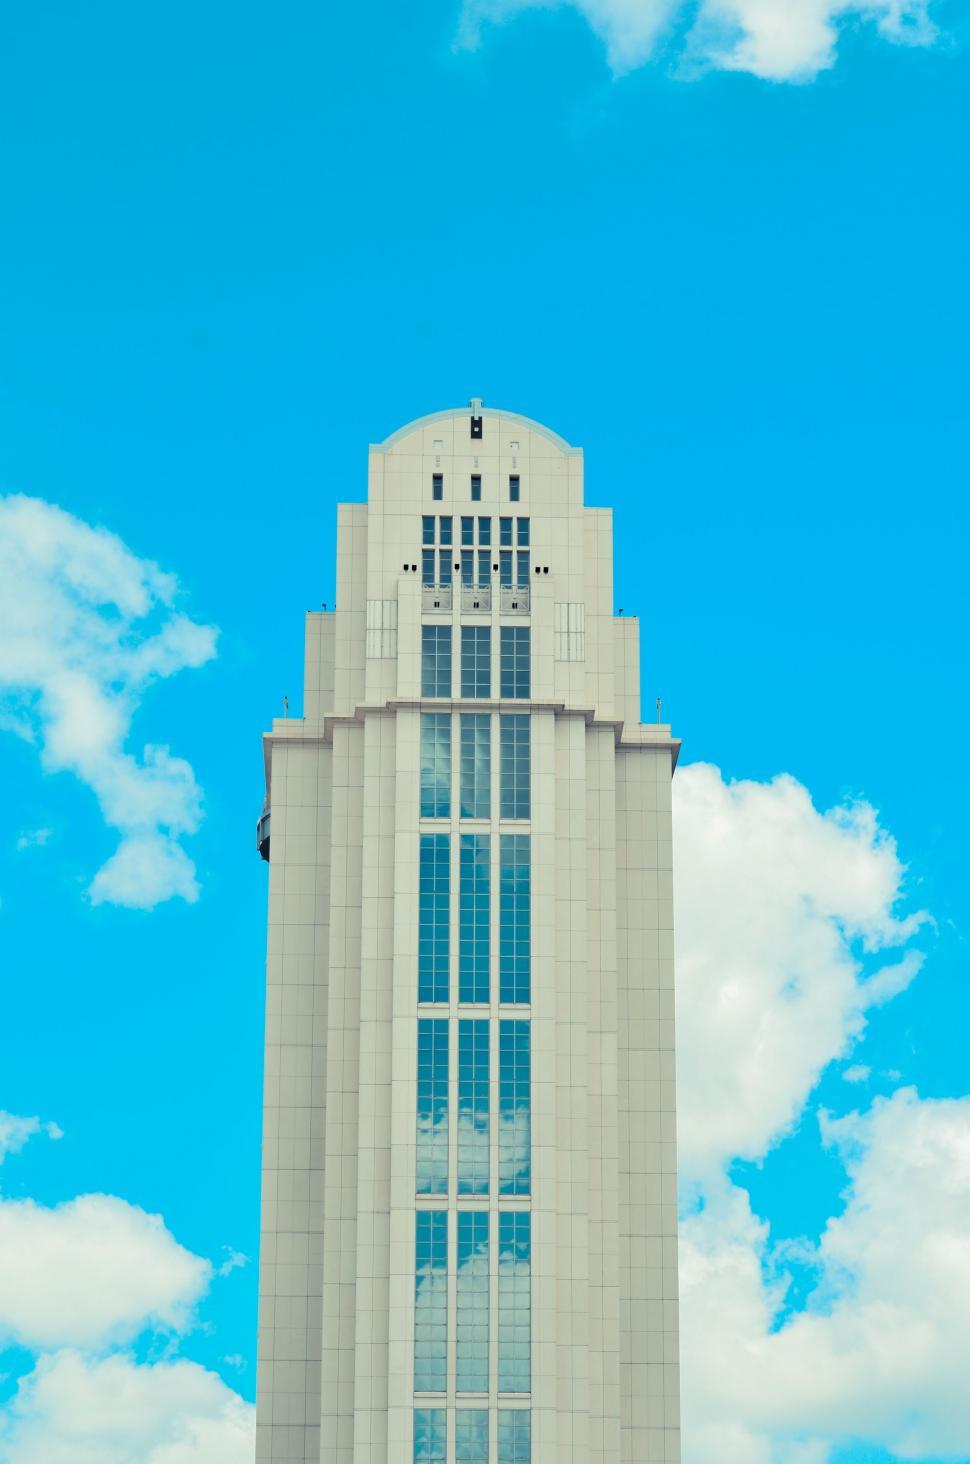 Free Image of Tall Building With Clock At Its Summit 